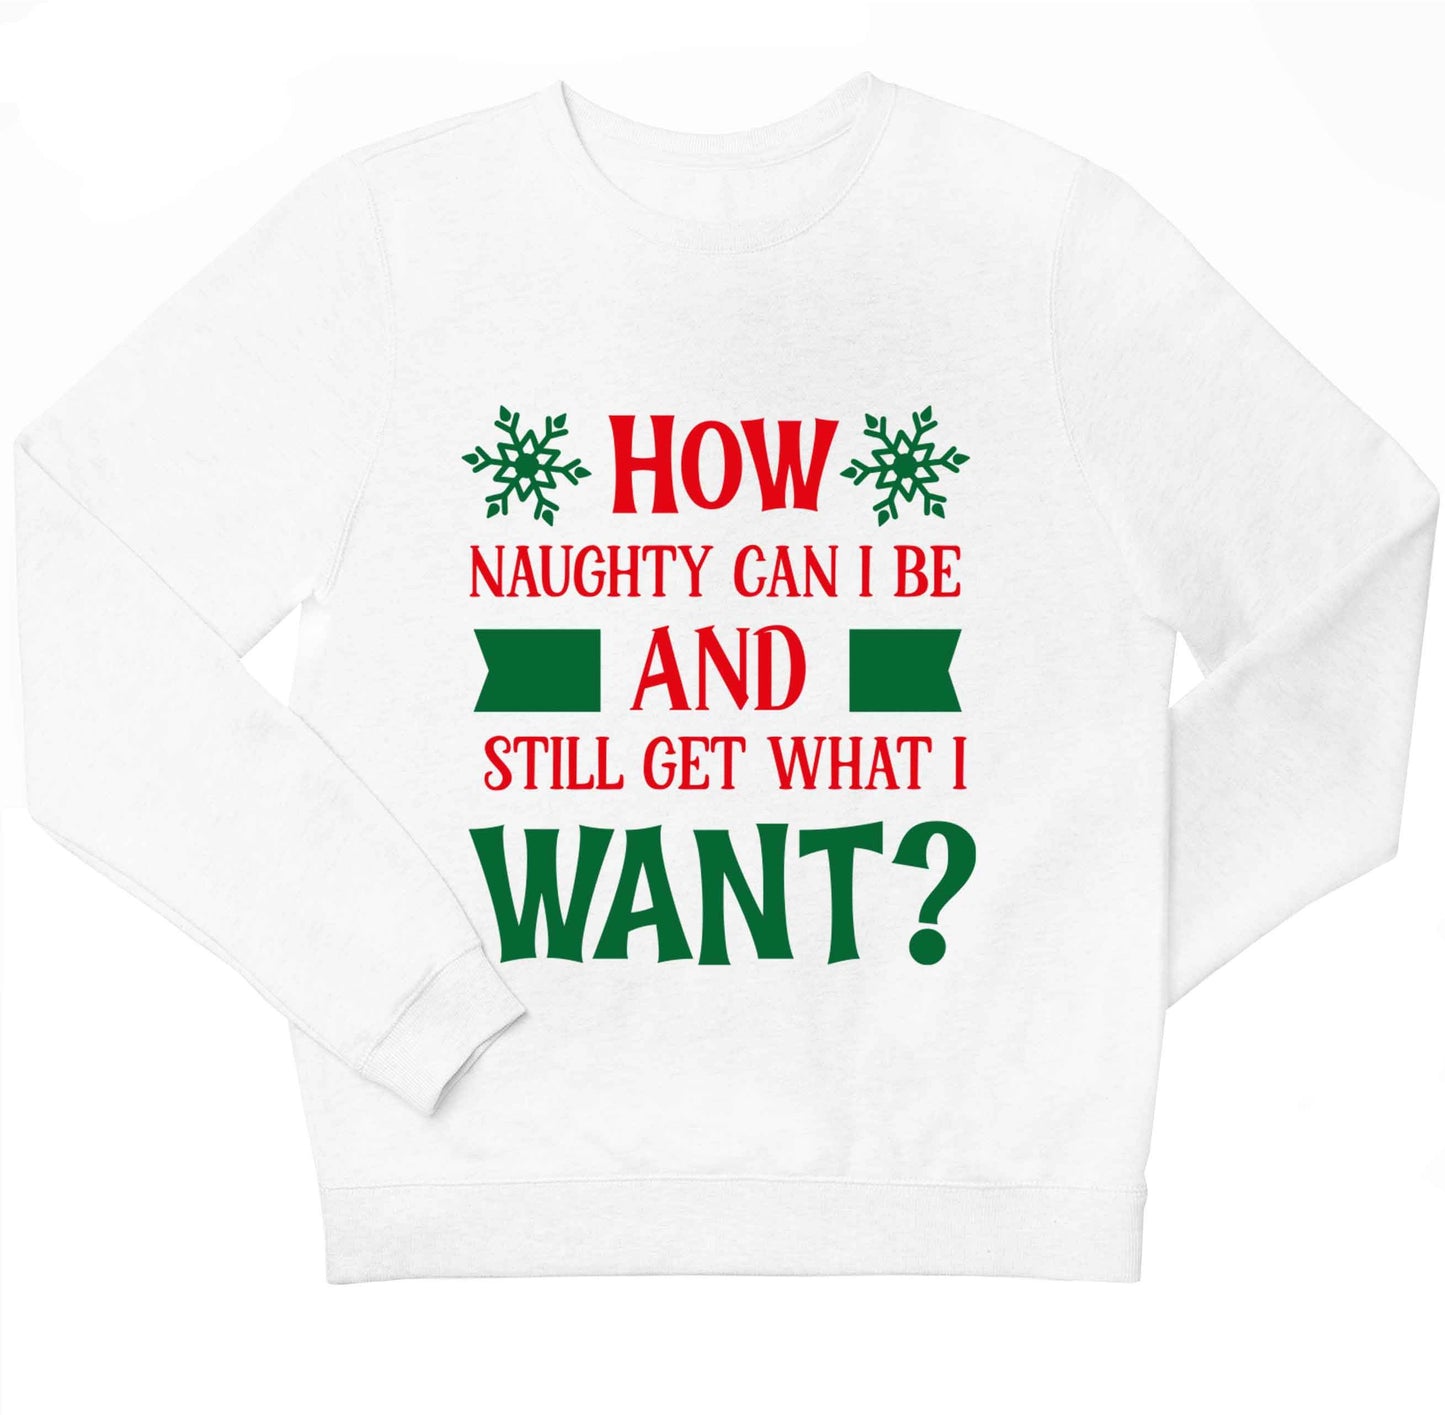 How naughty can I be and still get what I want? children's white sweater 12-13 Years